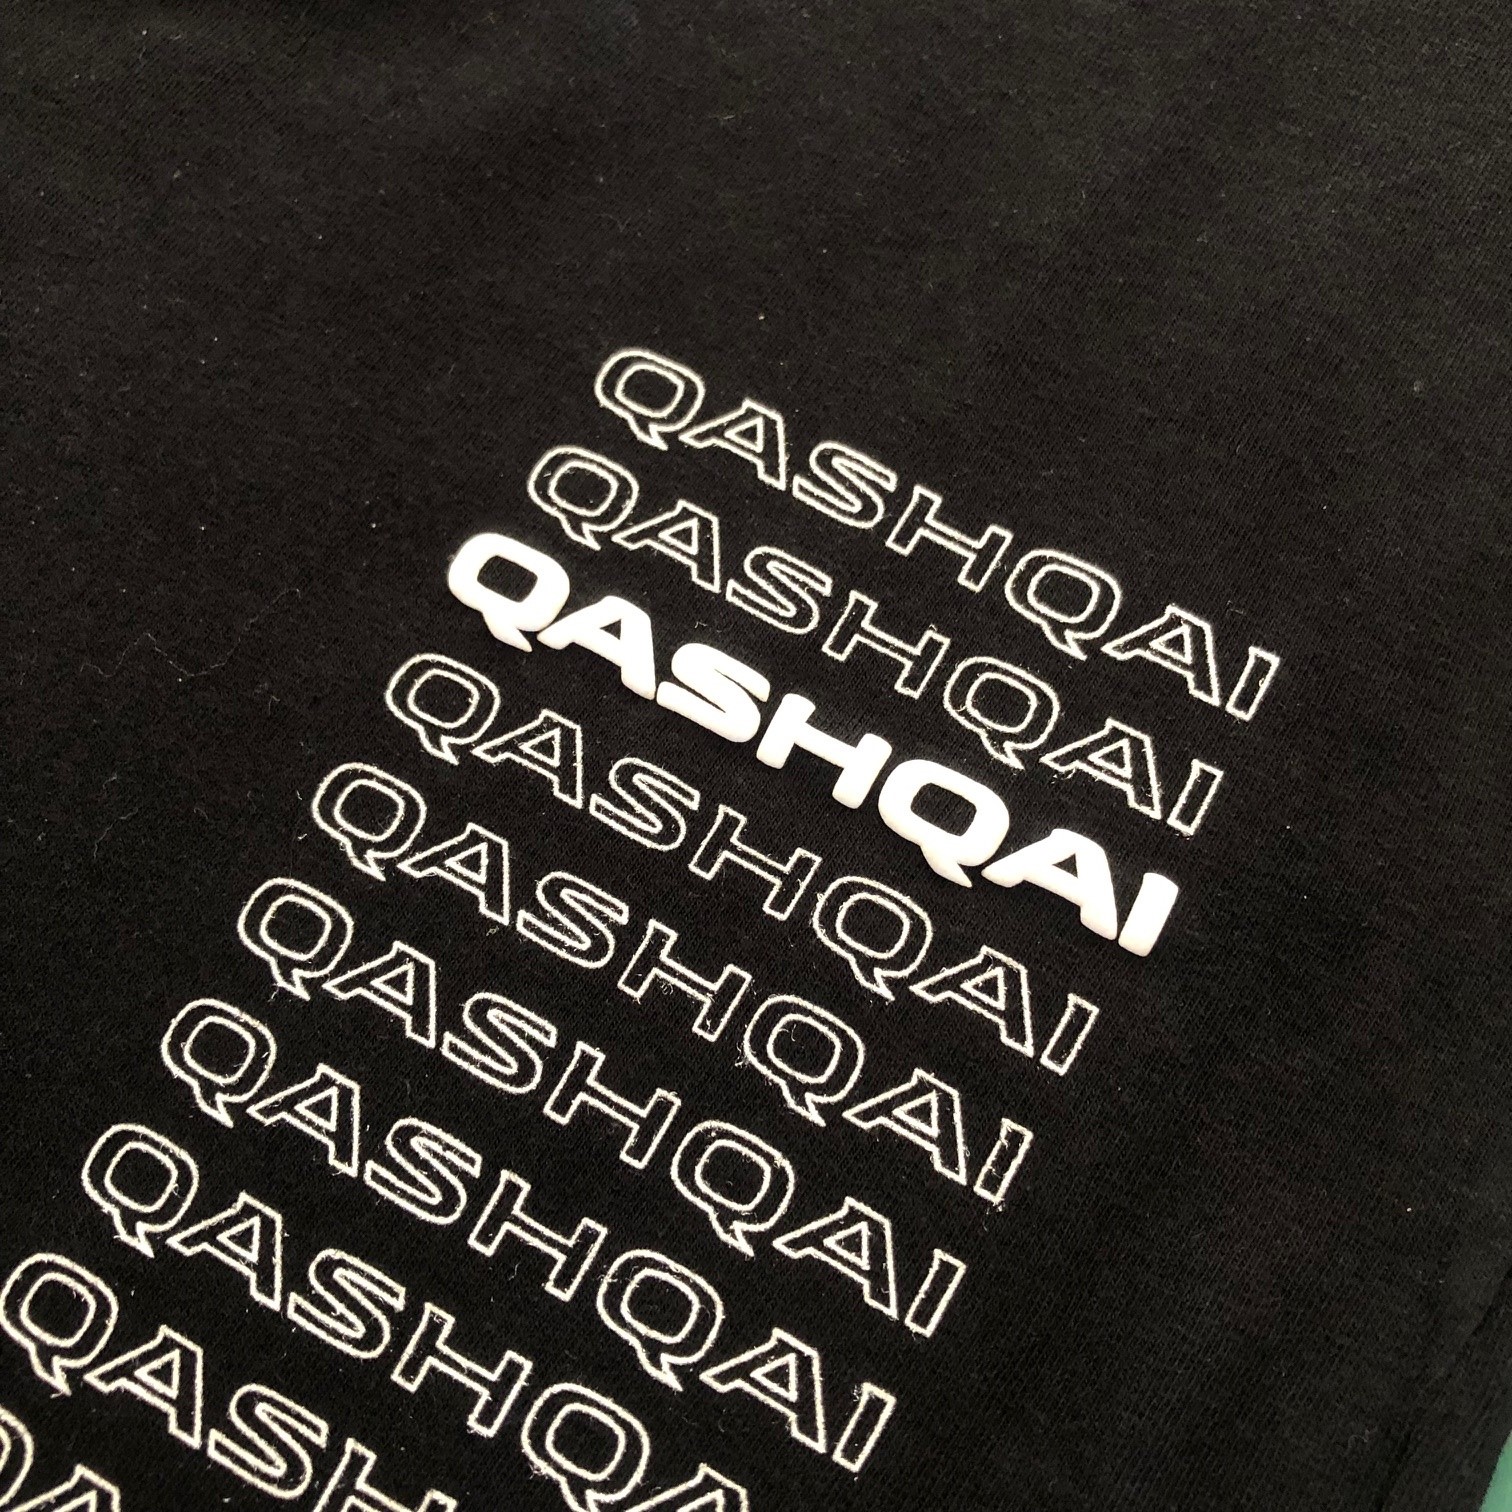 Qashqai Collection Archives - Nissan Merchandise Store